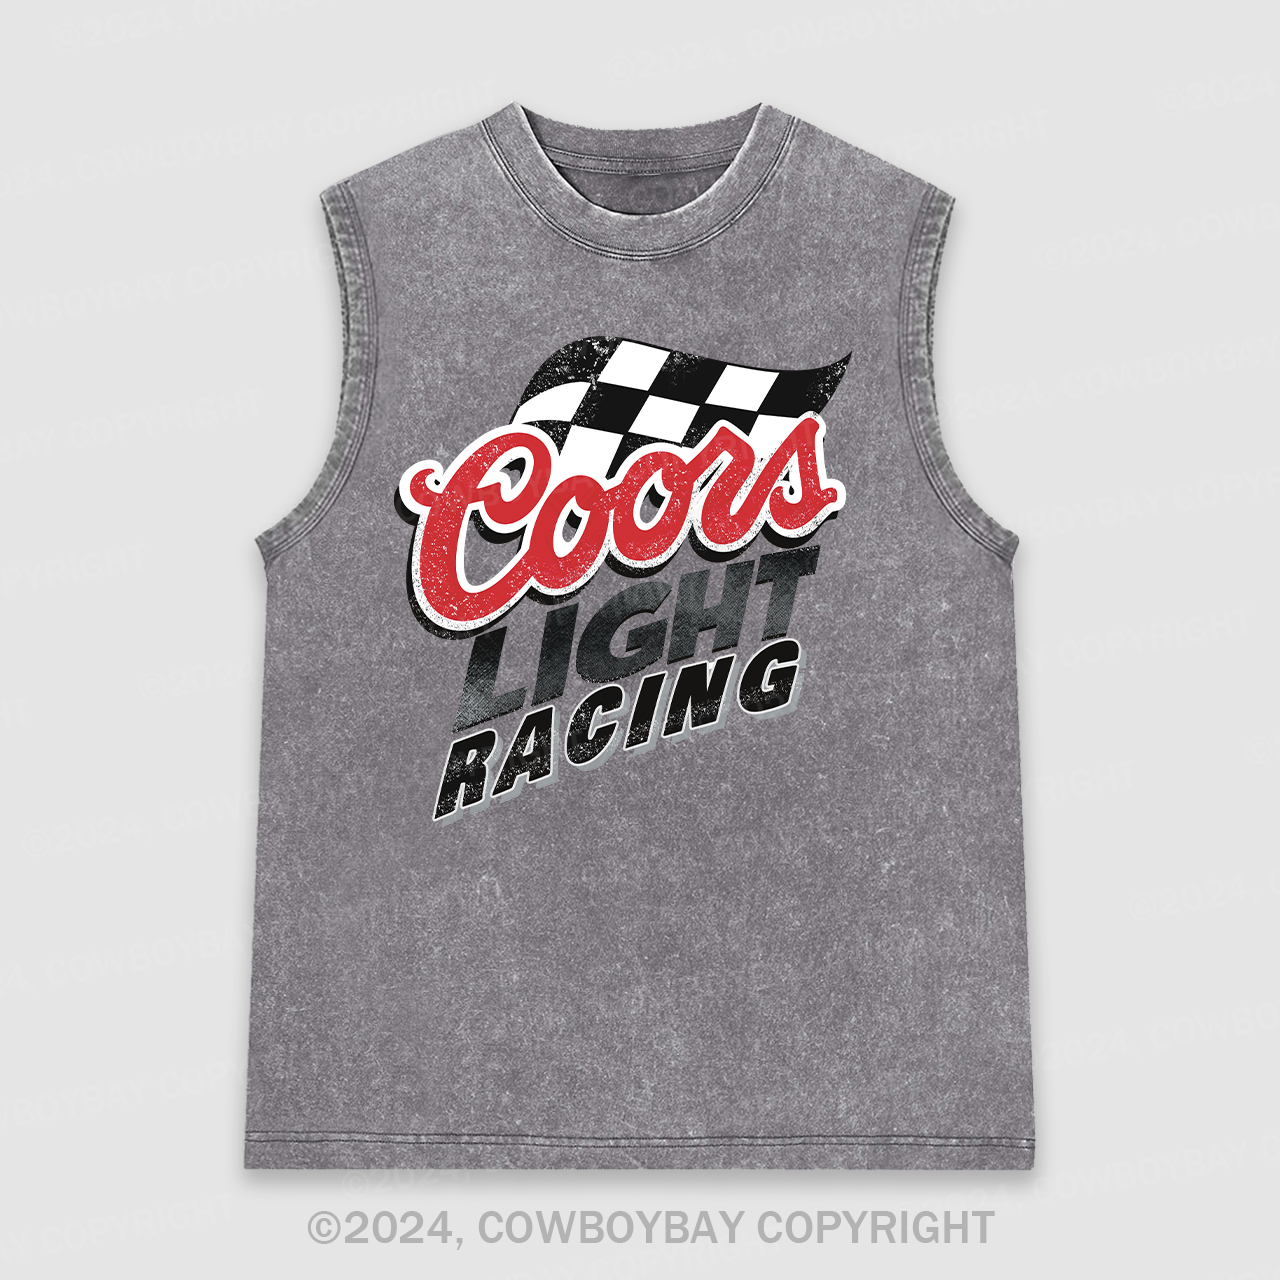 Coors Light Racing Washed Tanks